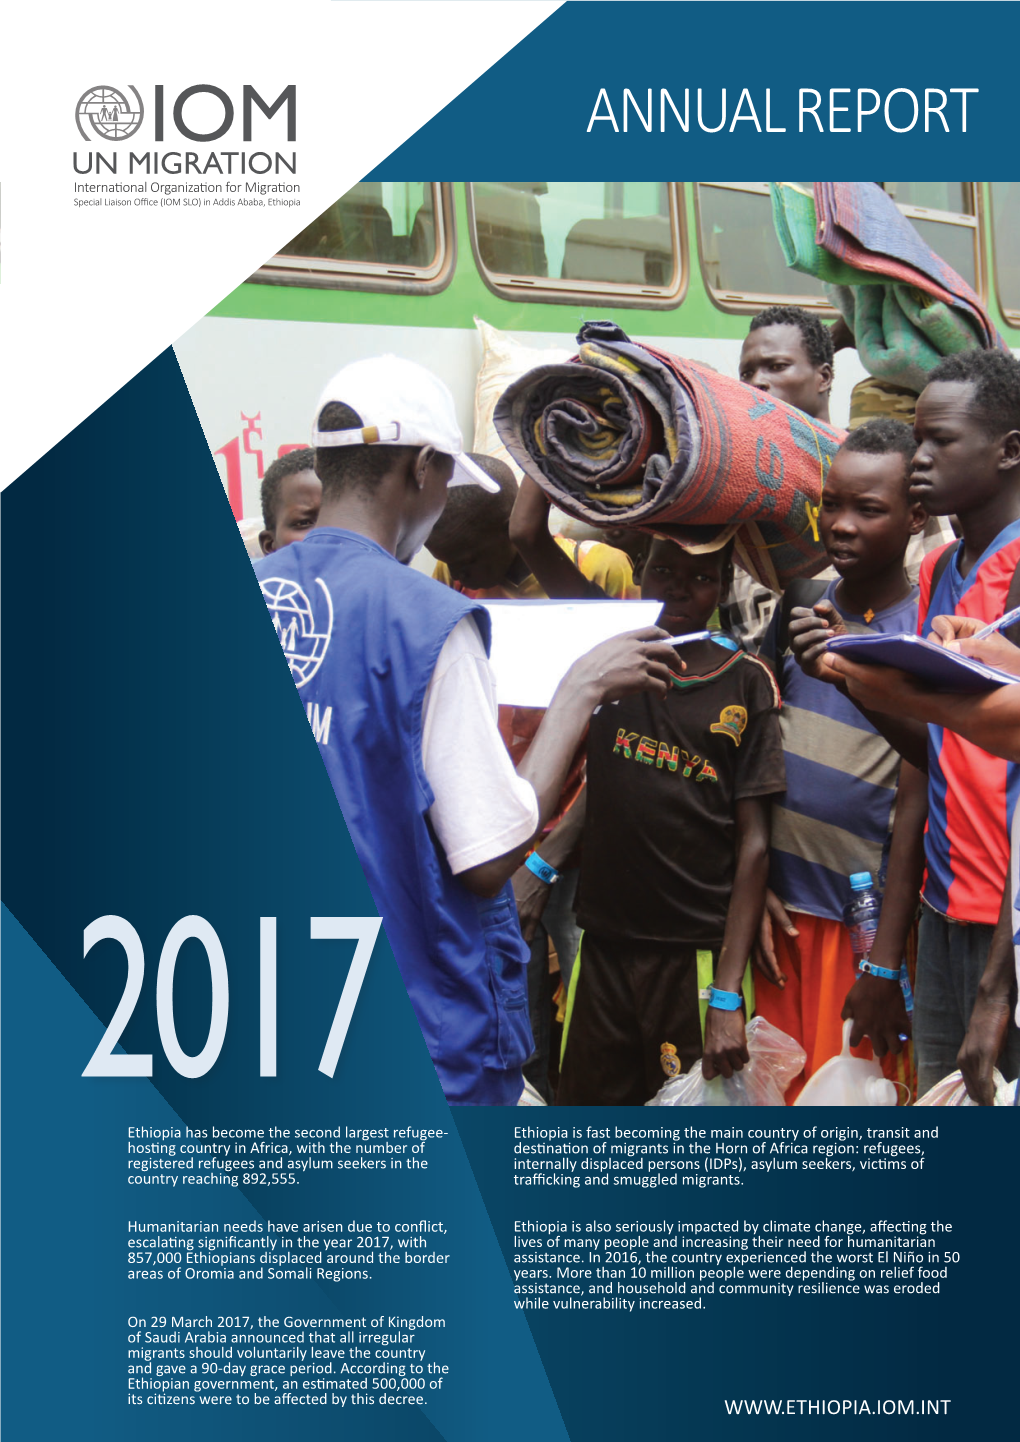 Annual Report UN Migration International Organization for Migration Special Liaison Office (IOM SLO) in Addis Ababa, Ethiopia